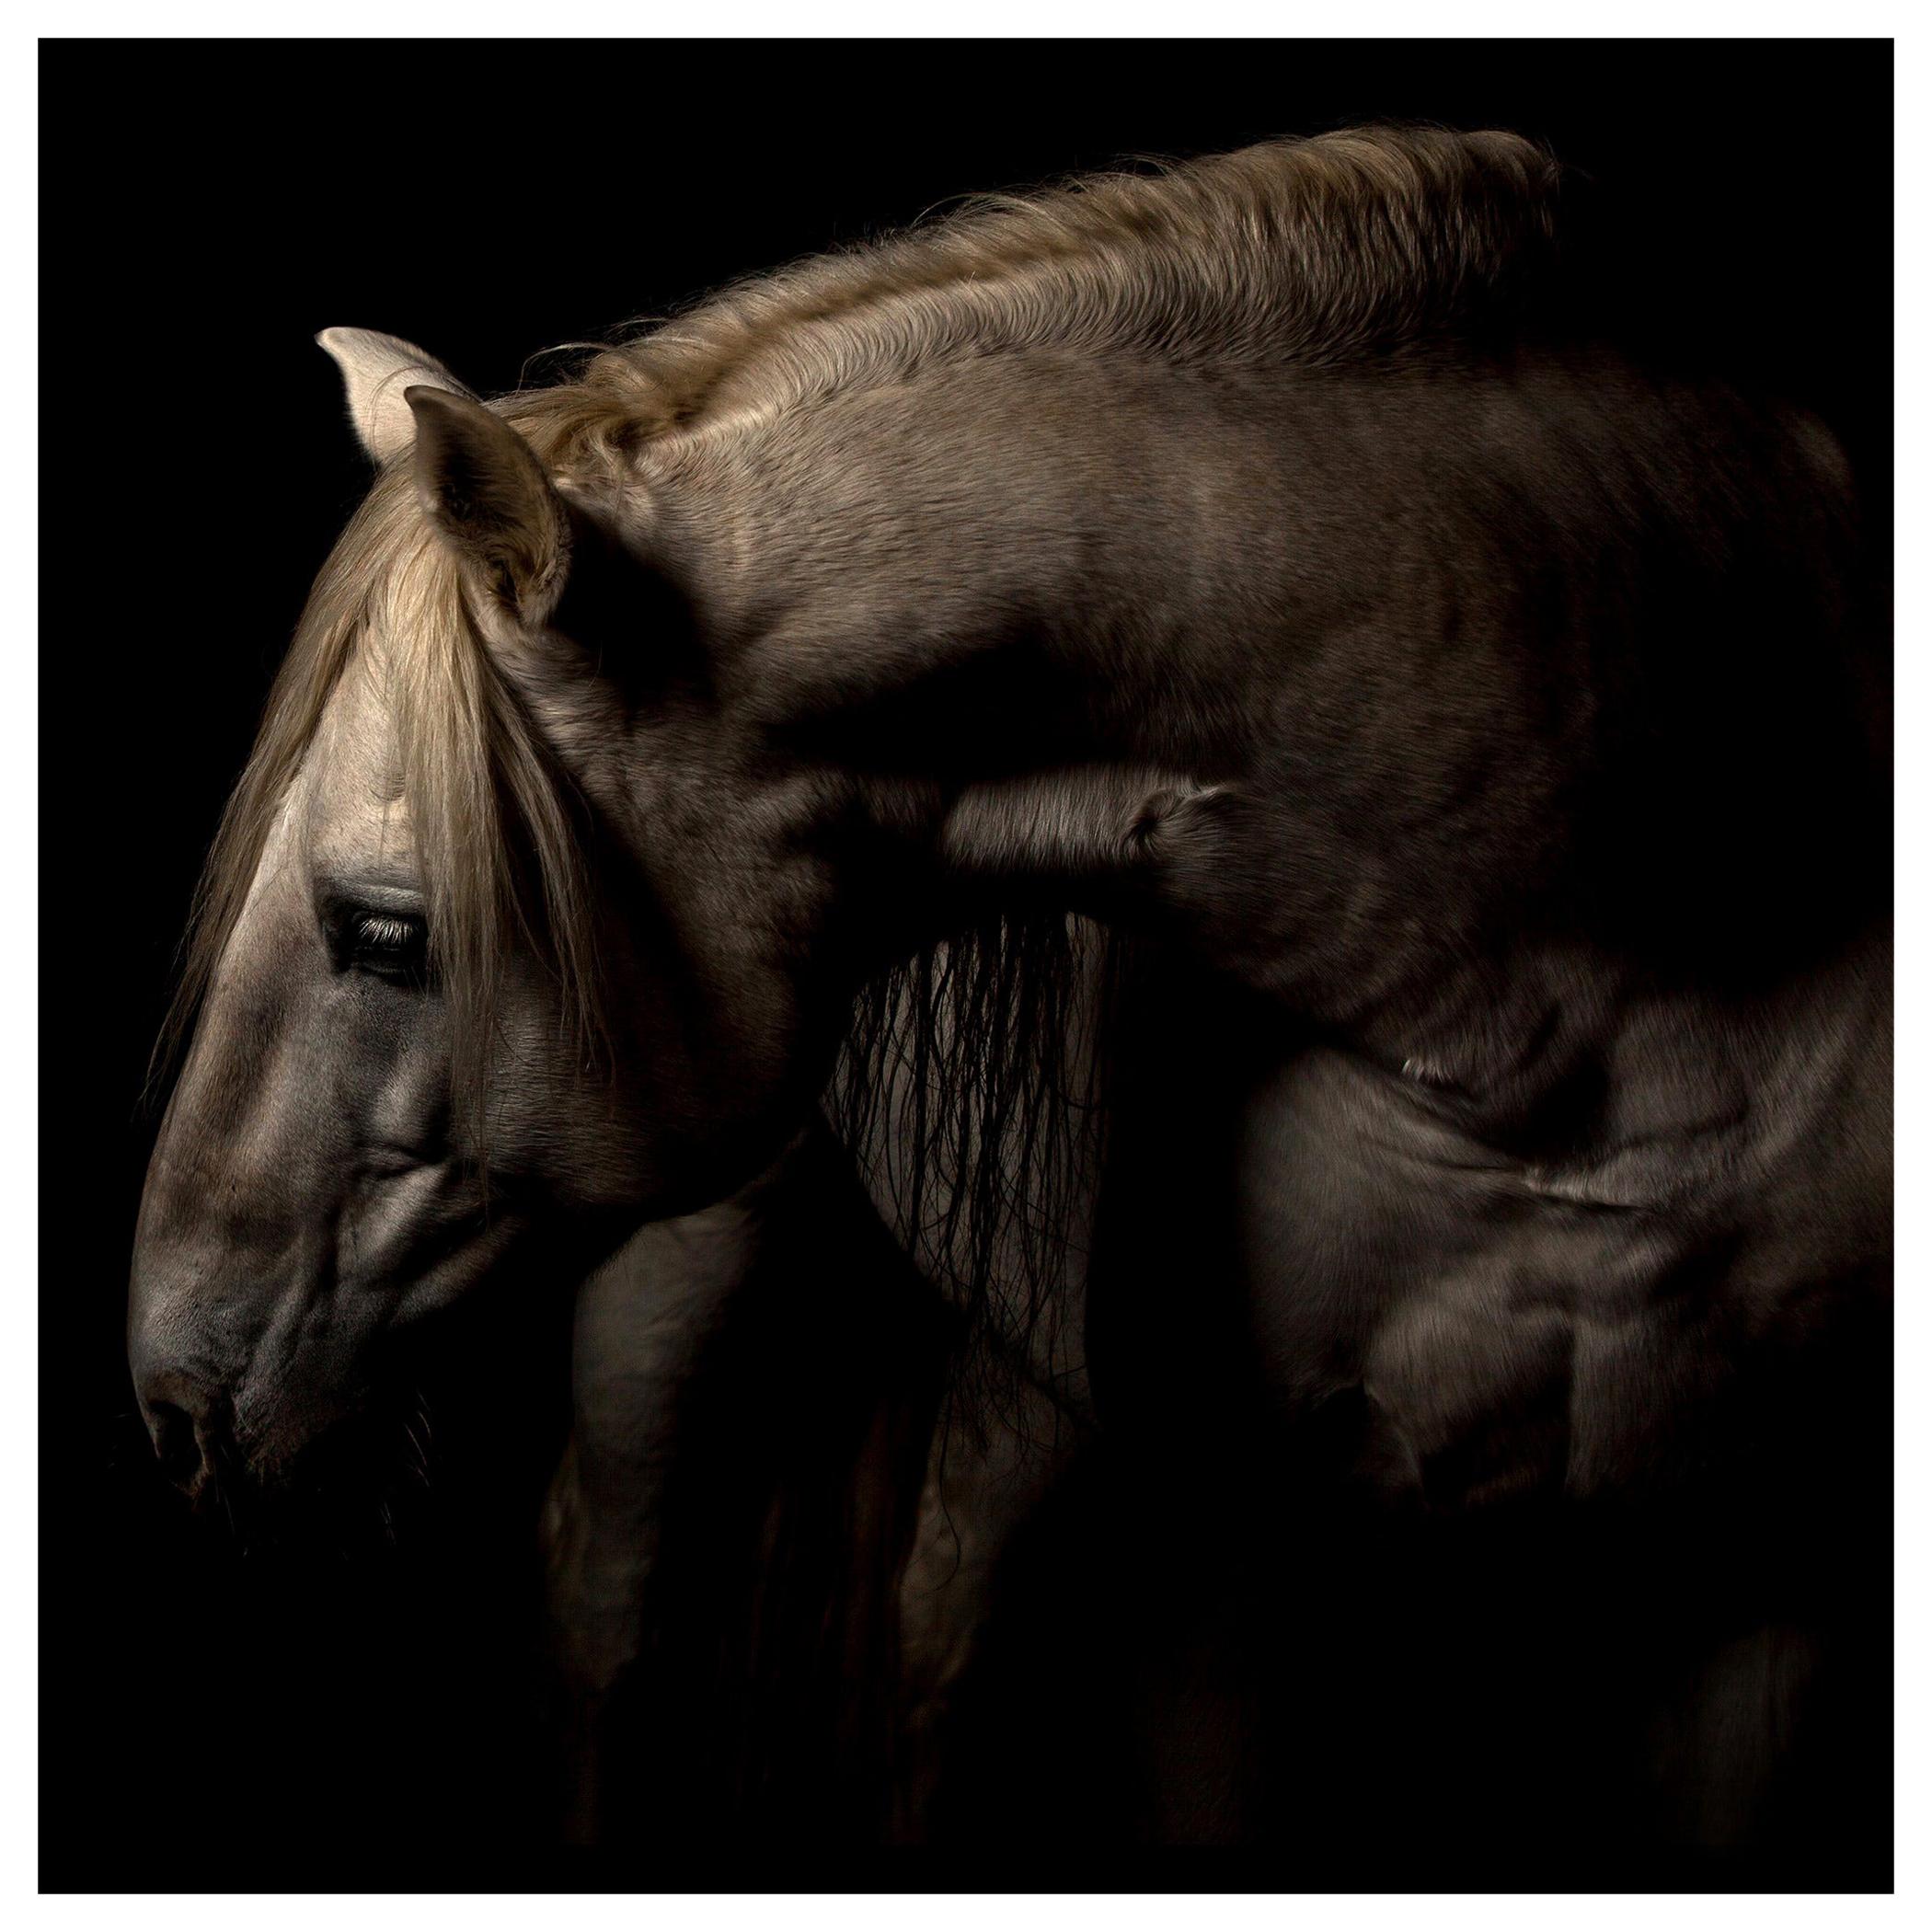 "Patience" Plexiglass Mounted Color Horse Photo by Lisa Houlgrave For Sale